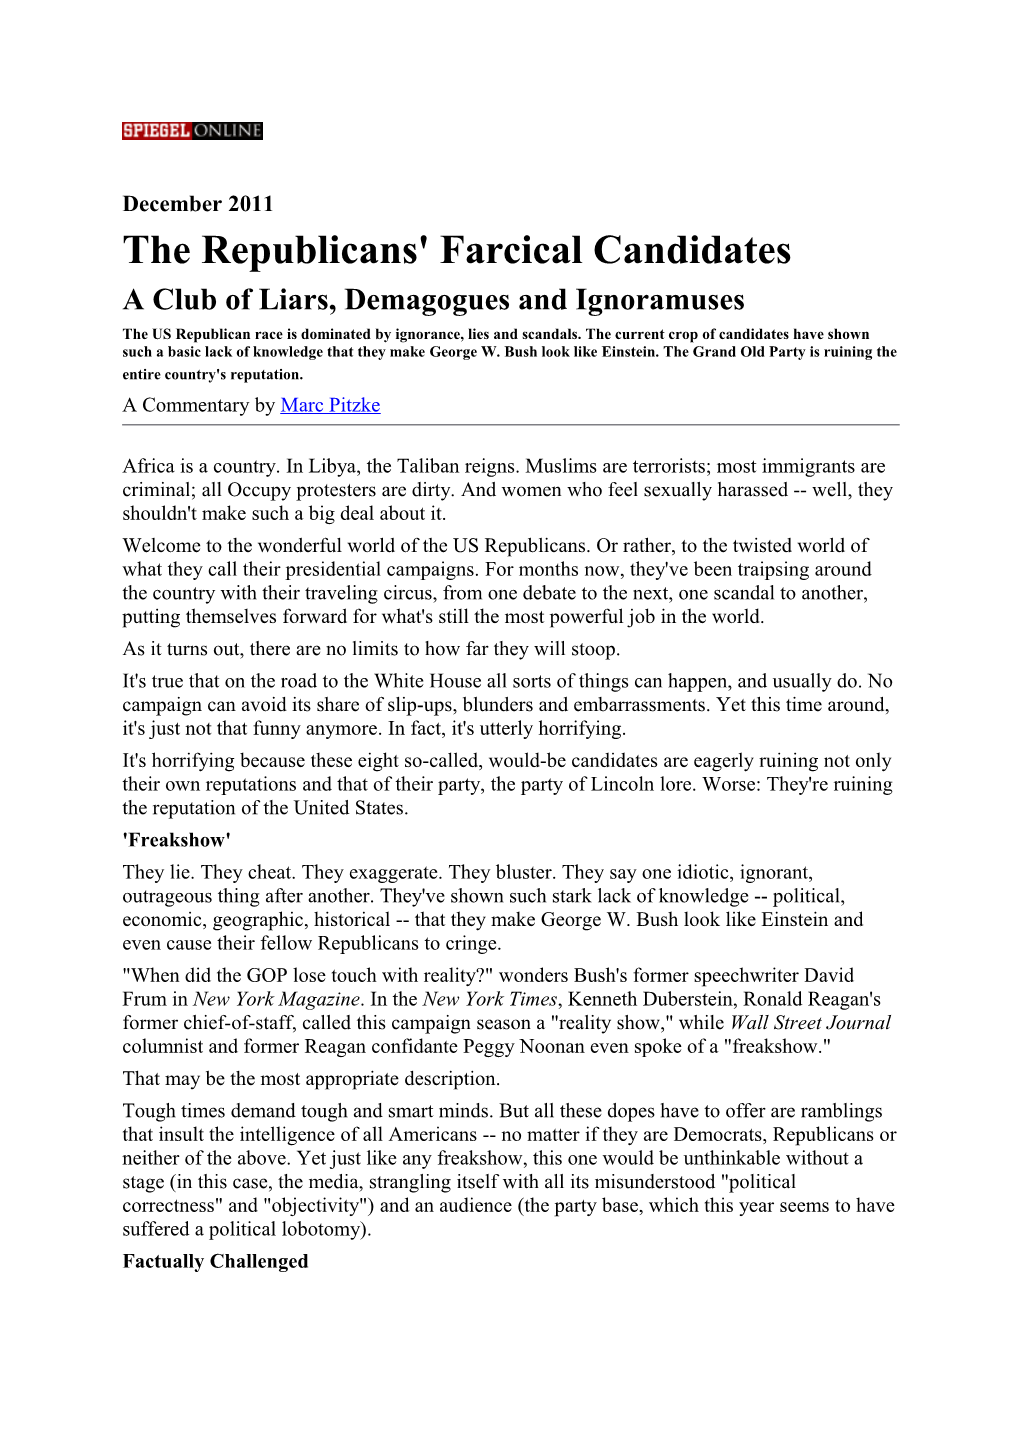 The Republicans' Farcical Candidates